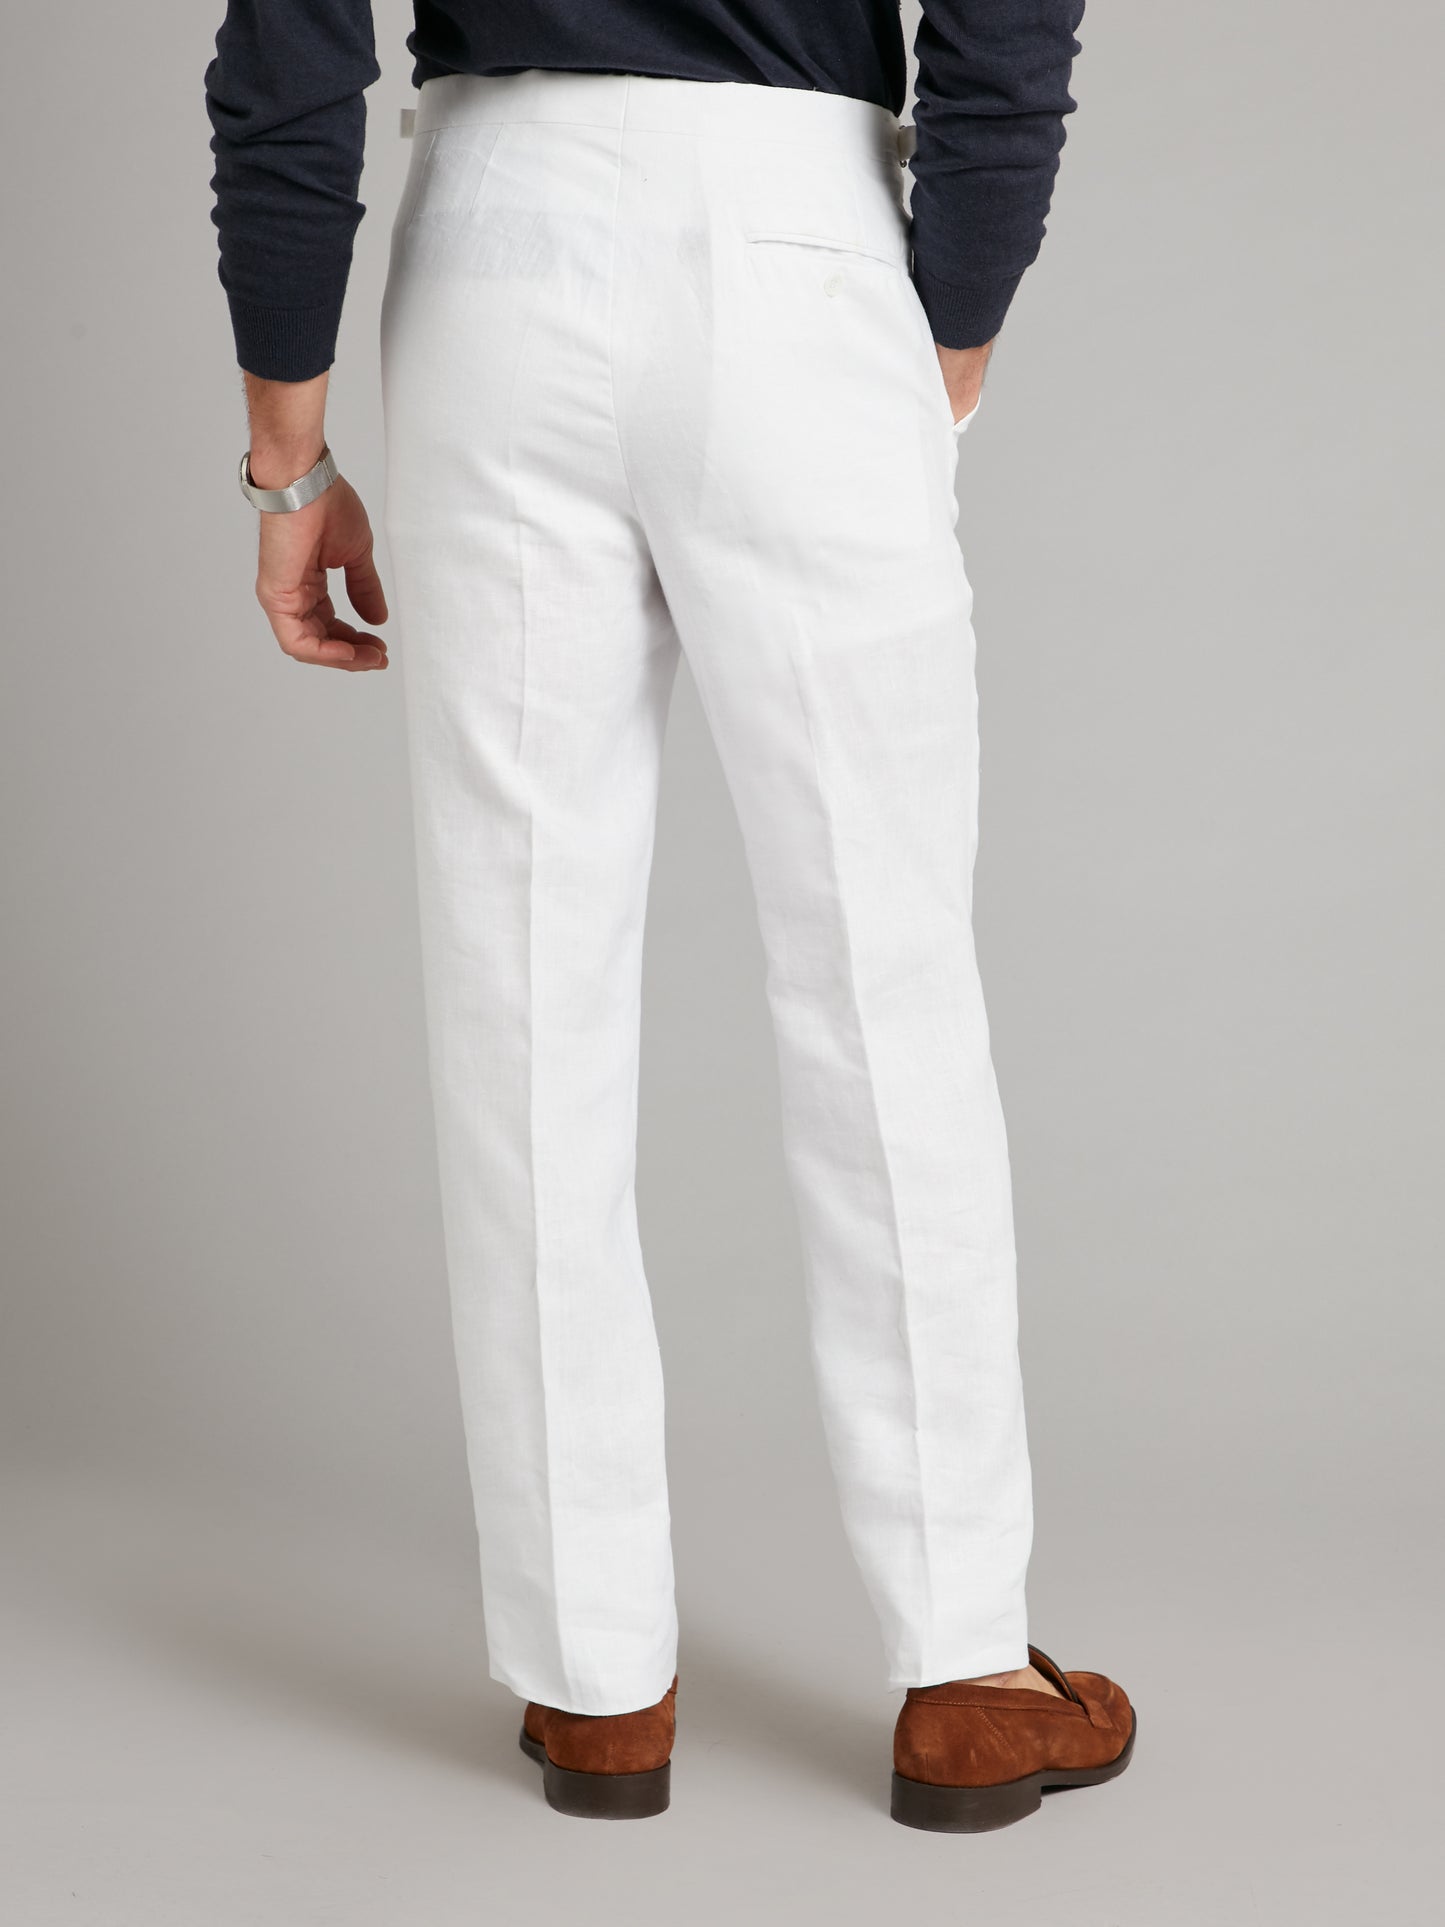 Flat Front Trousers - White Linen